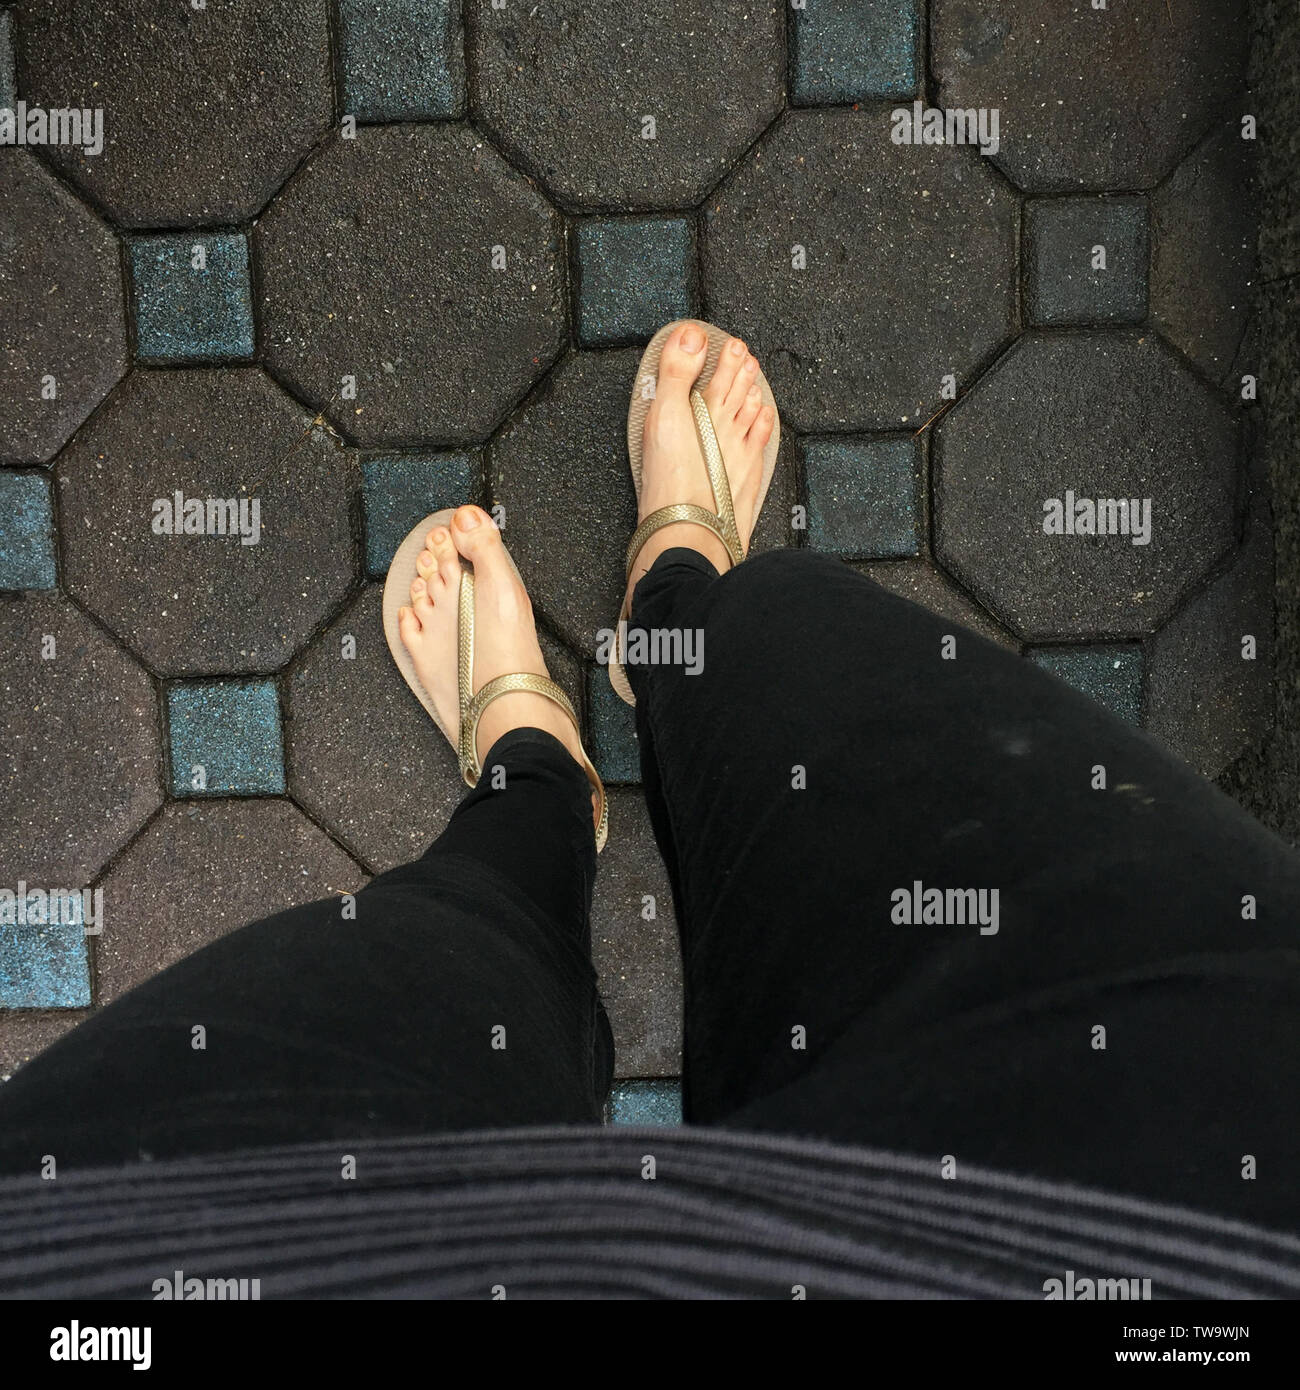 Selfie of feet in sandals shoes on tile background Stock Photo - Alamy